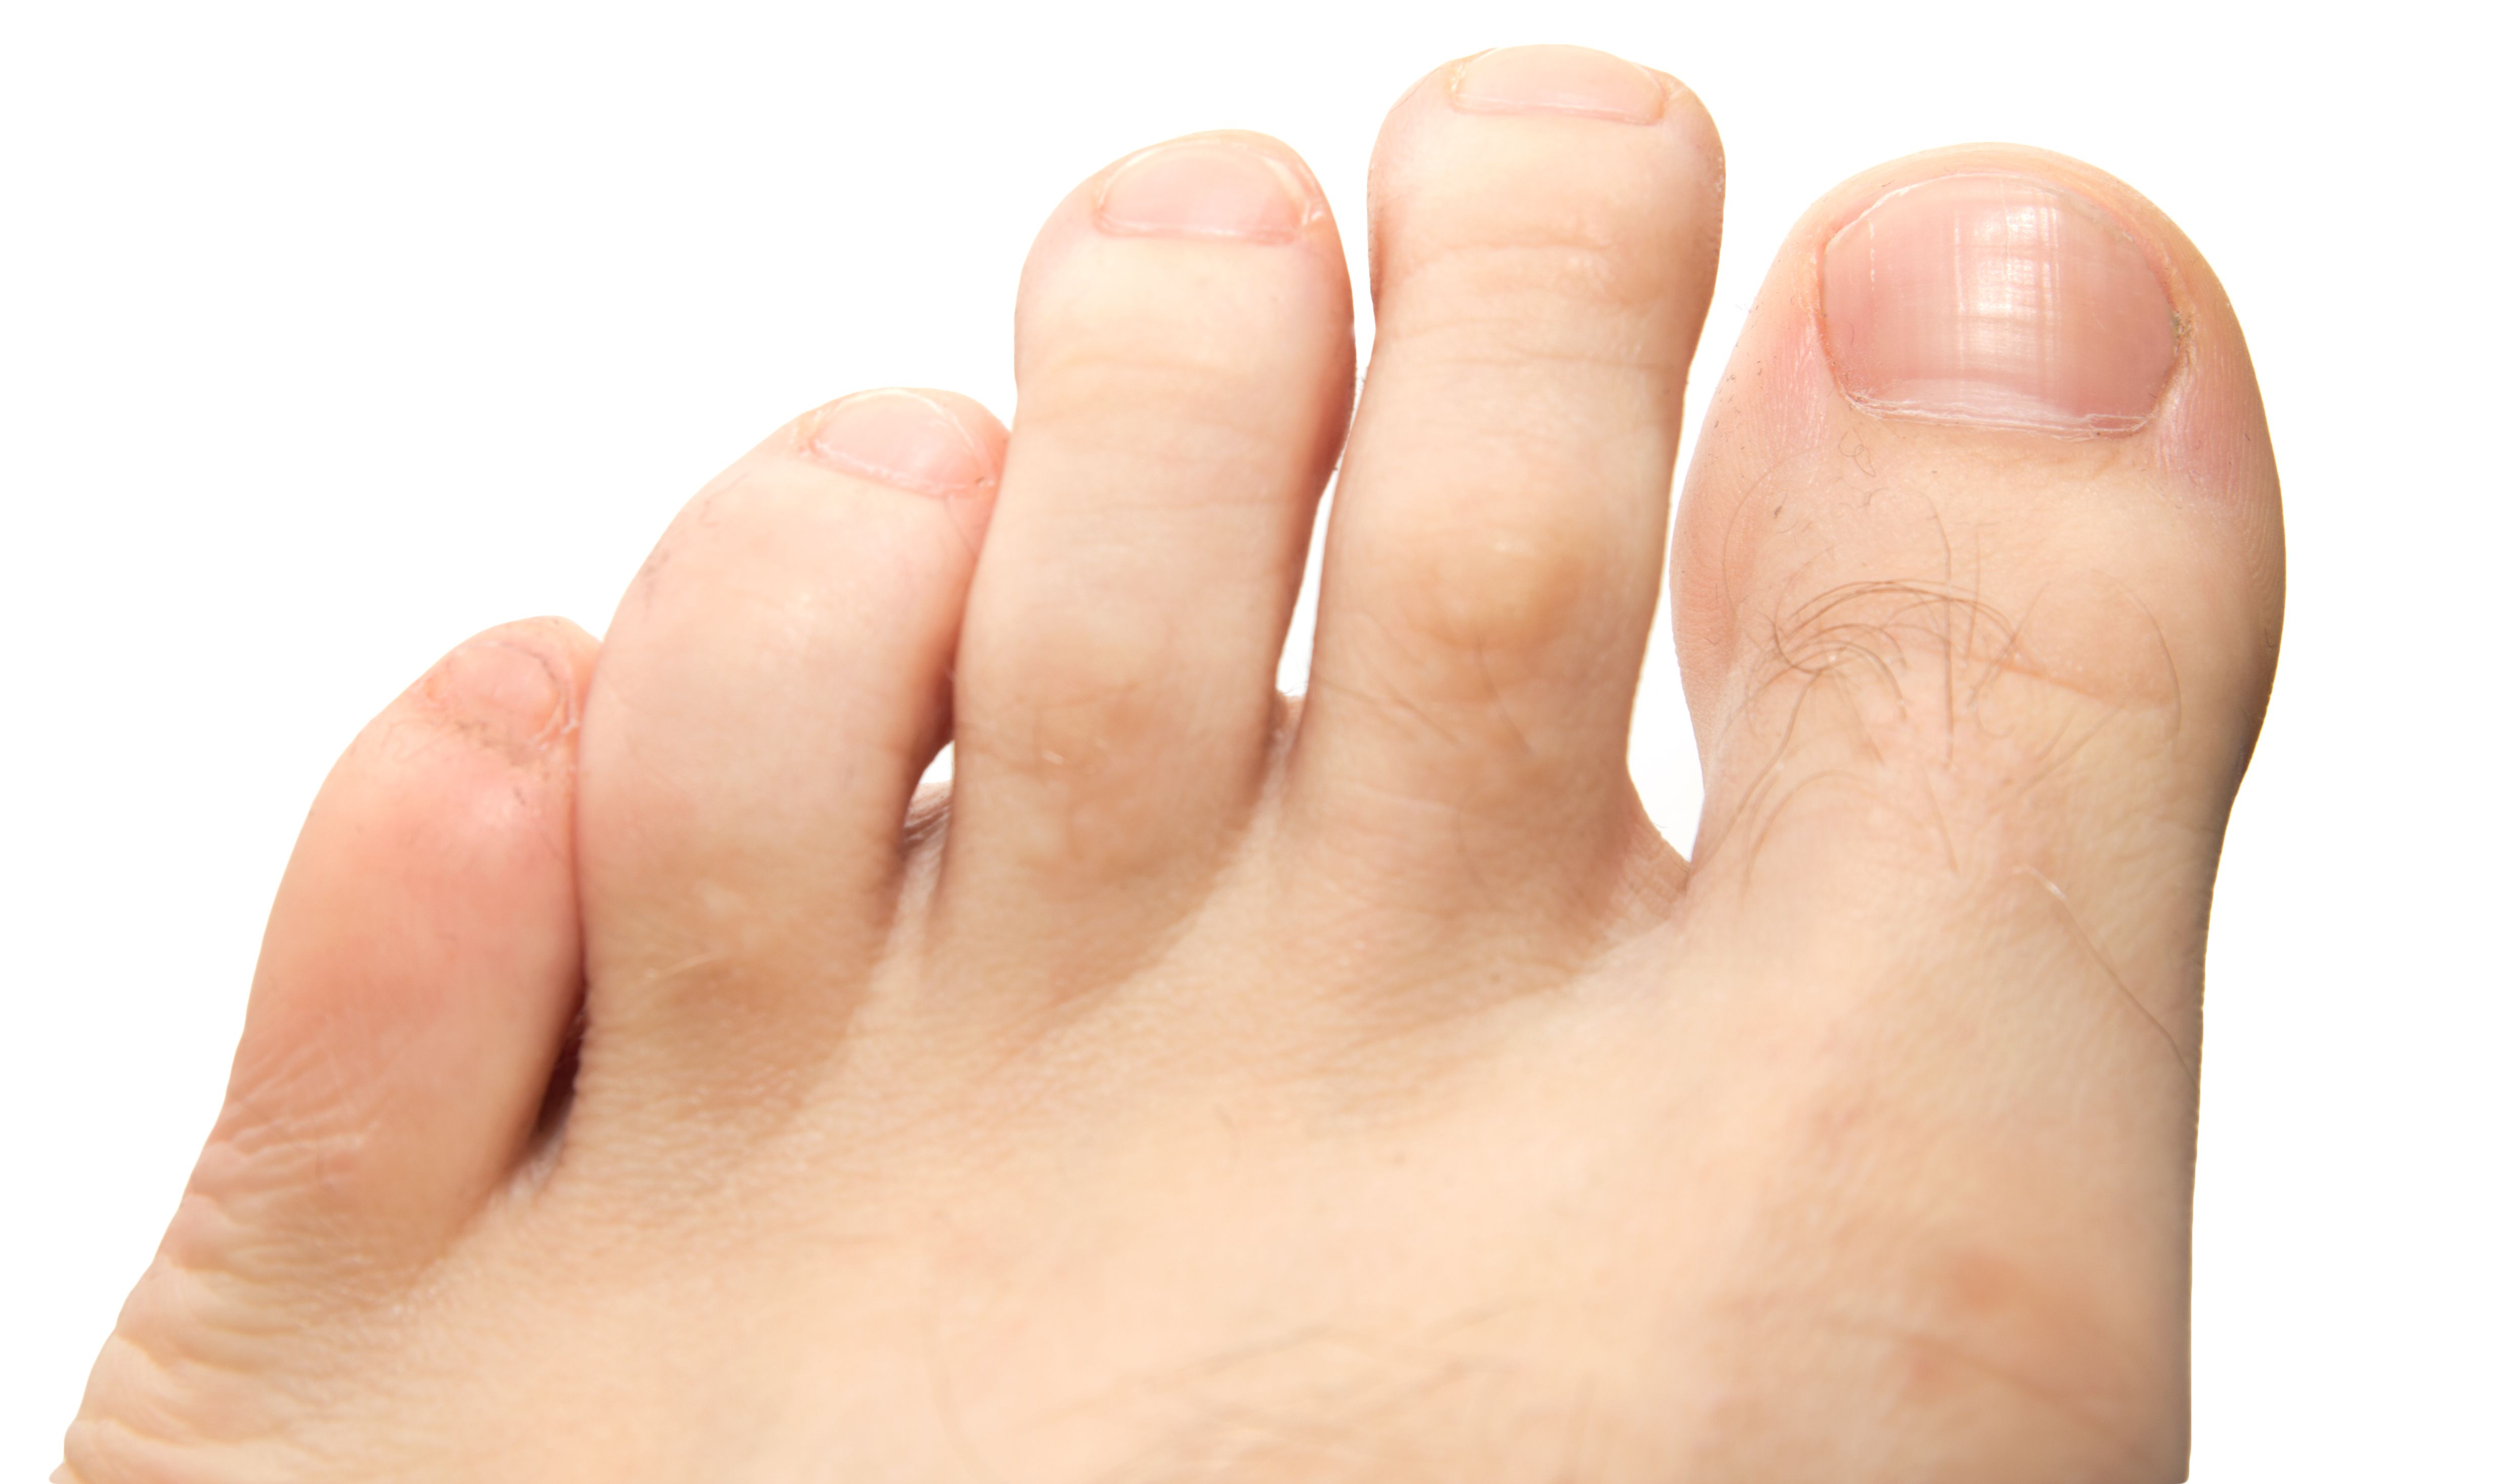 Papilloma in feet Chiropody and podiatry treatments available across Cheshire